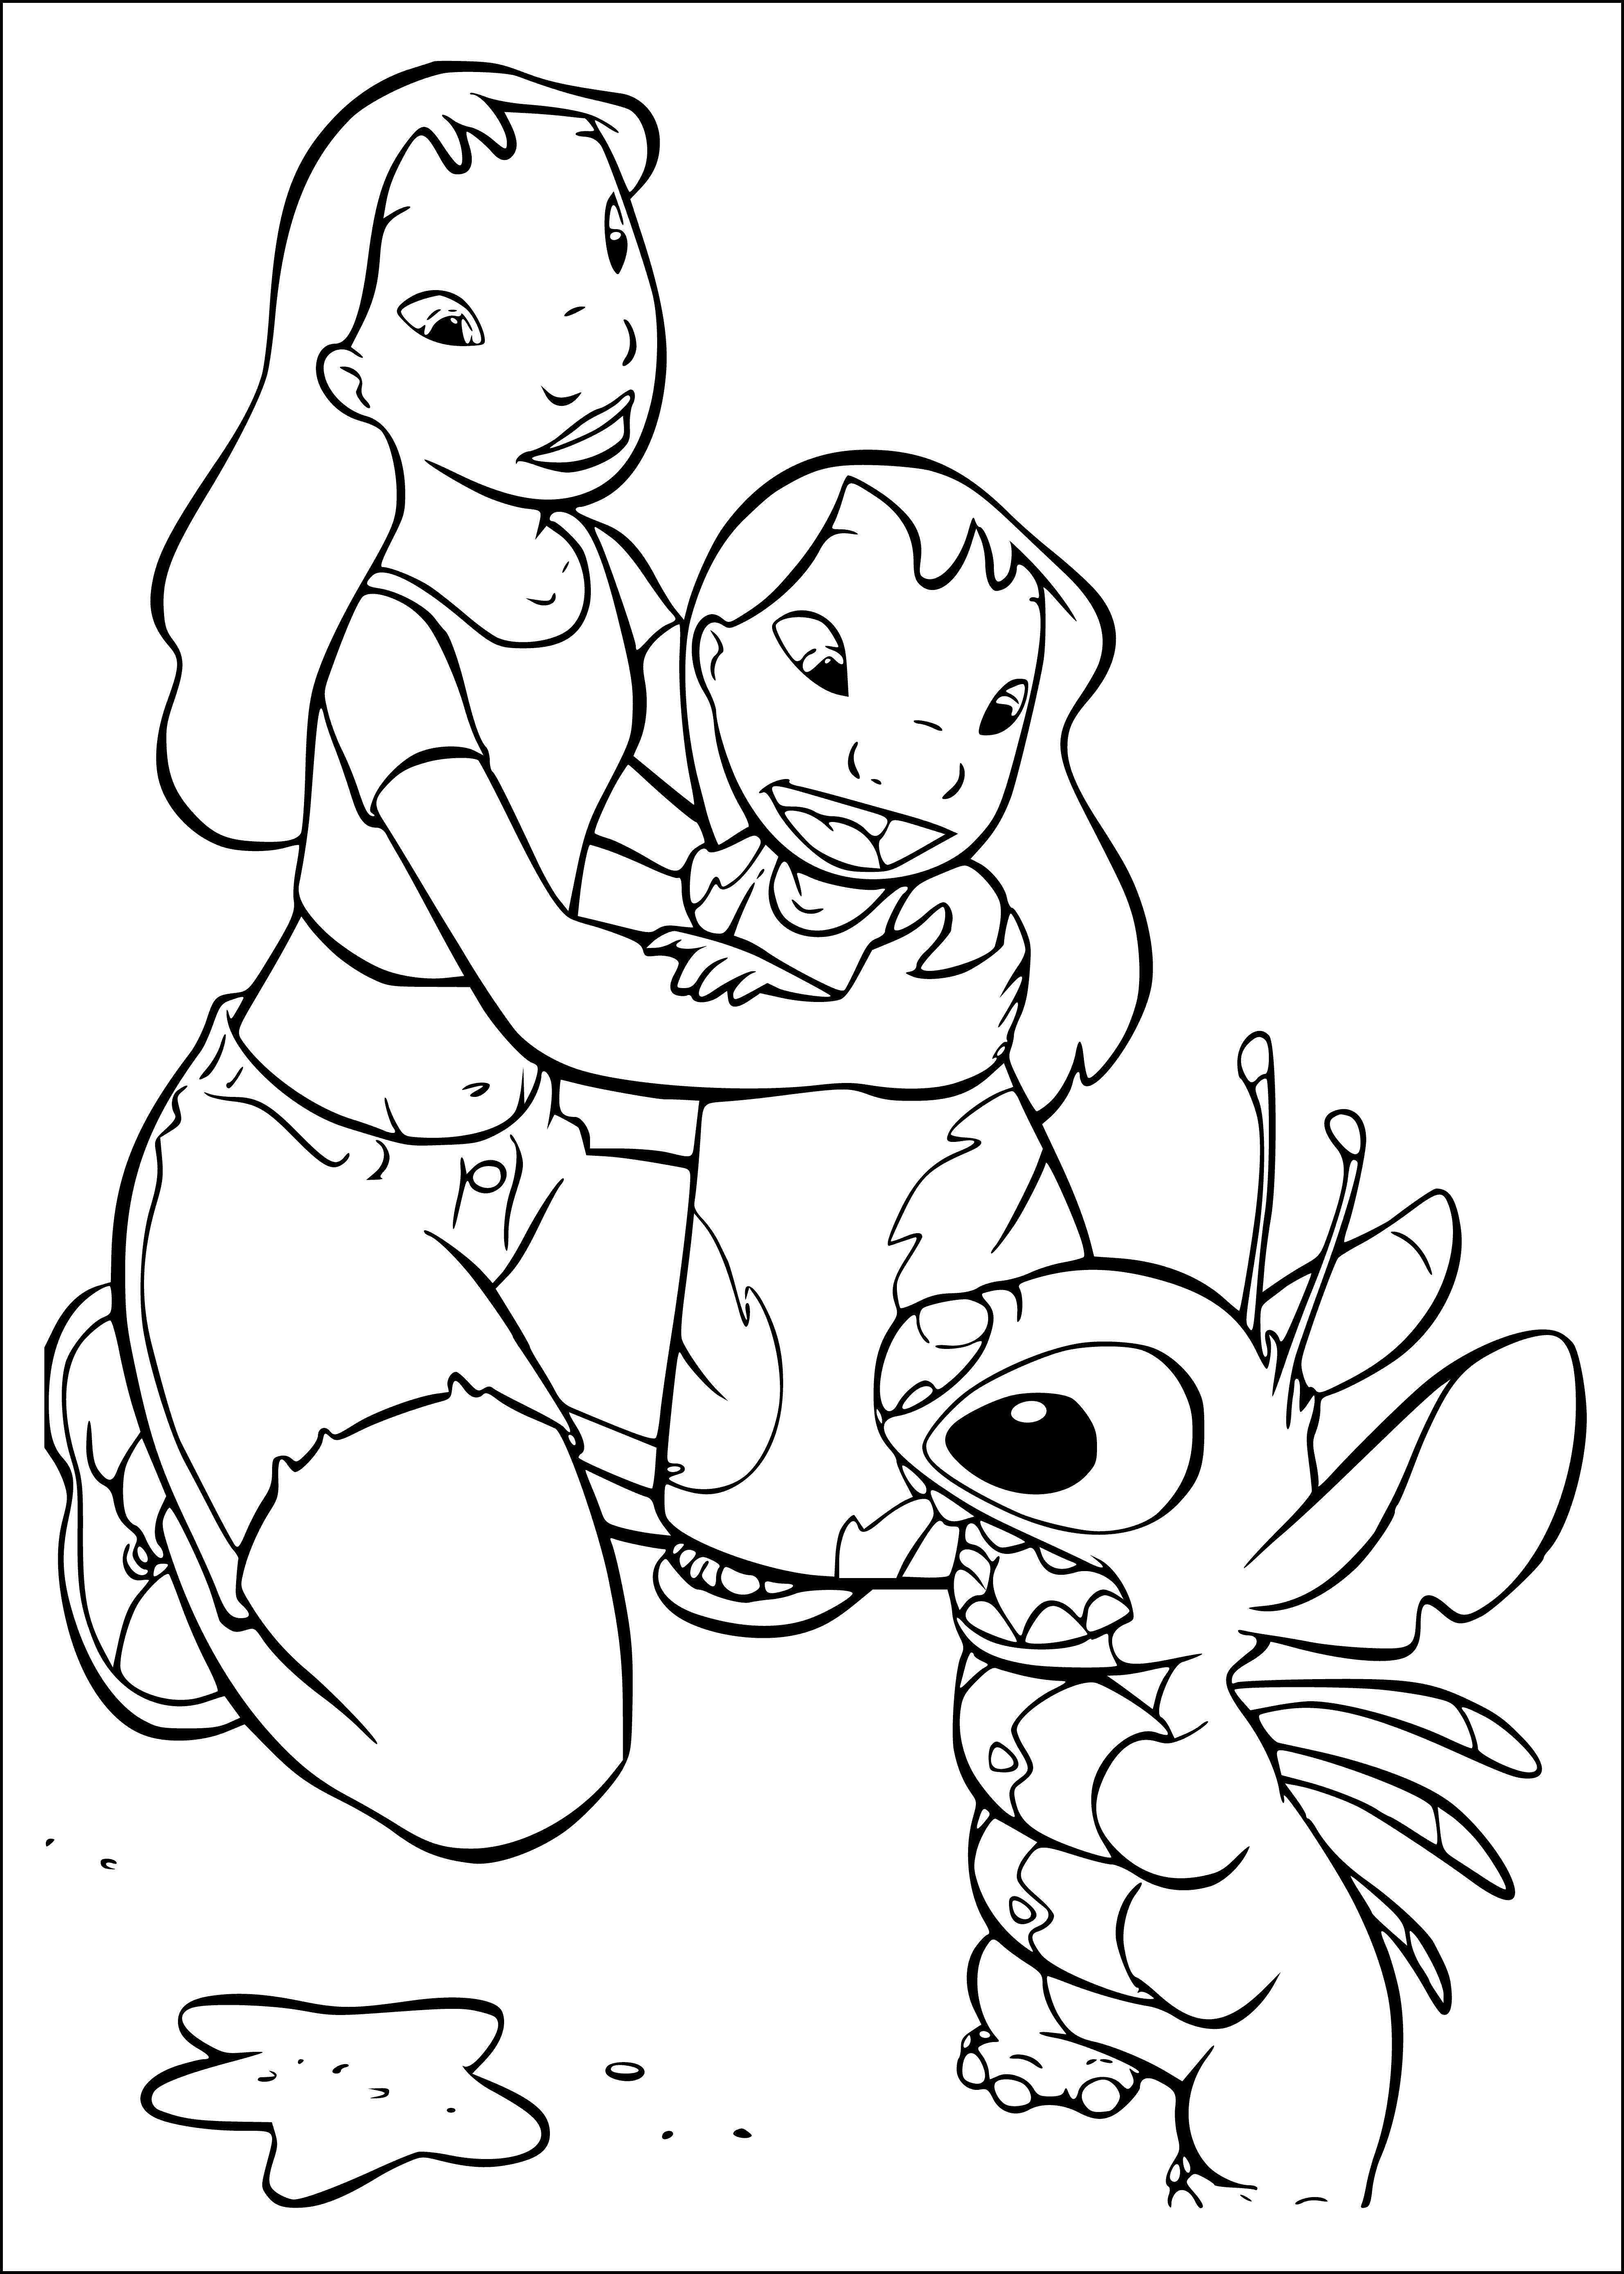 coloring page: Stitch is terrified as alien cops approach, guns drawn, to arrest him.